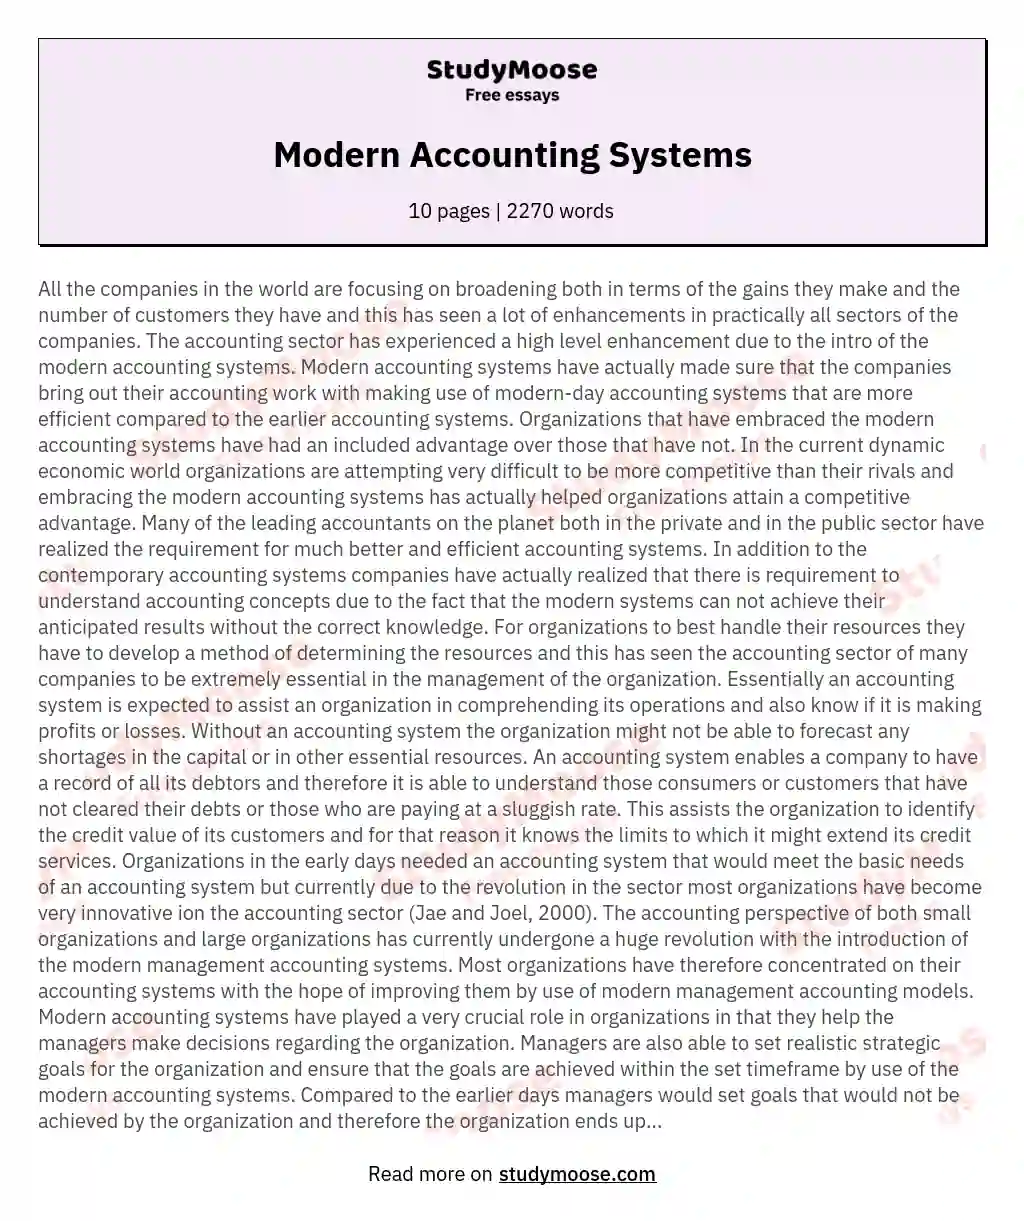 Modern Accounting Systems essay